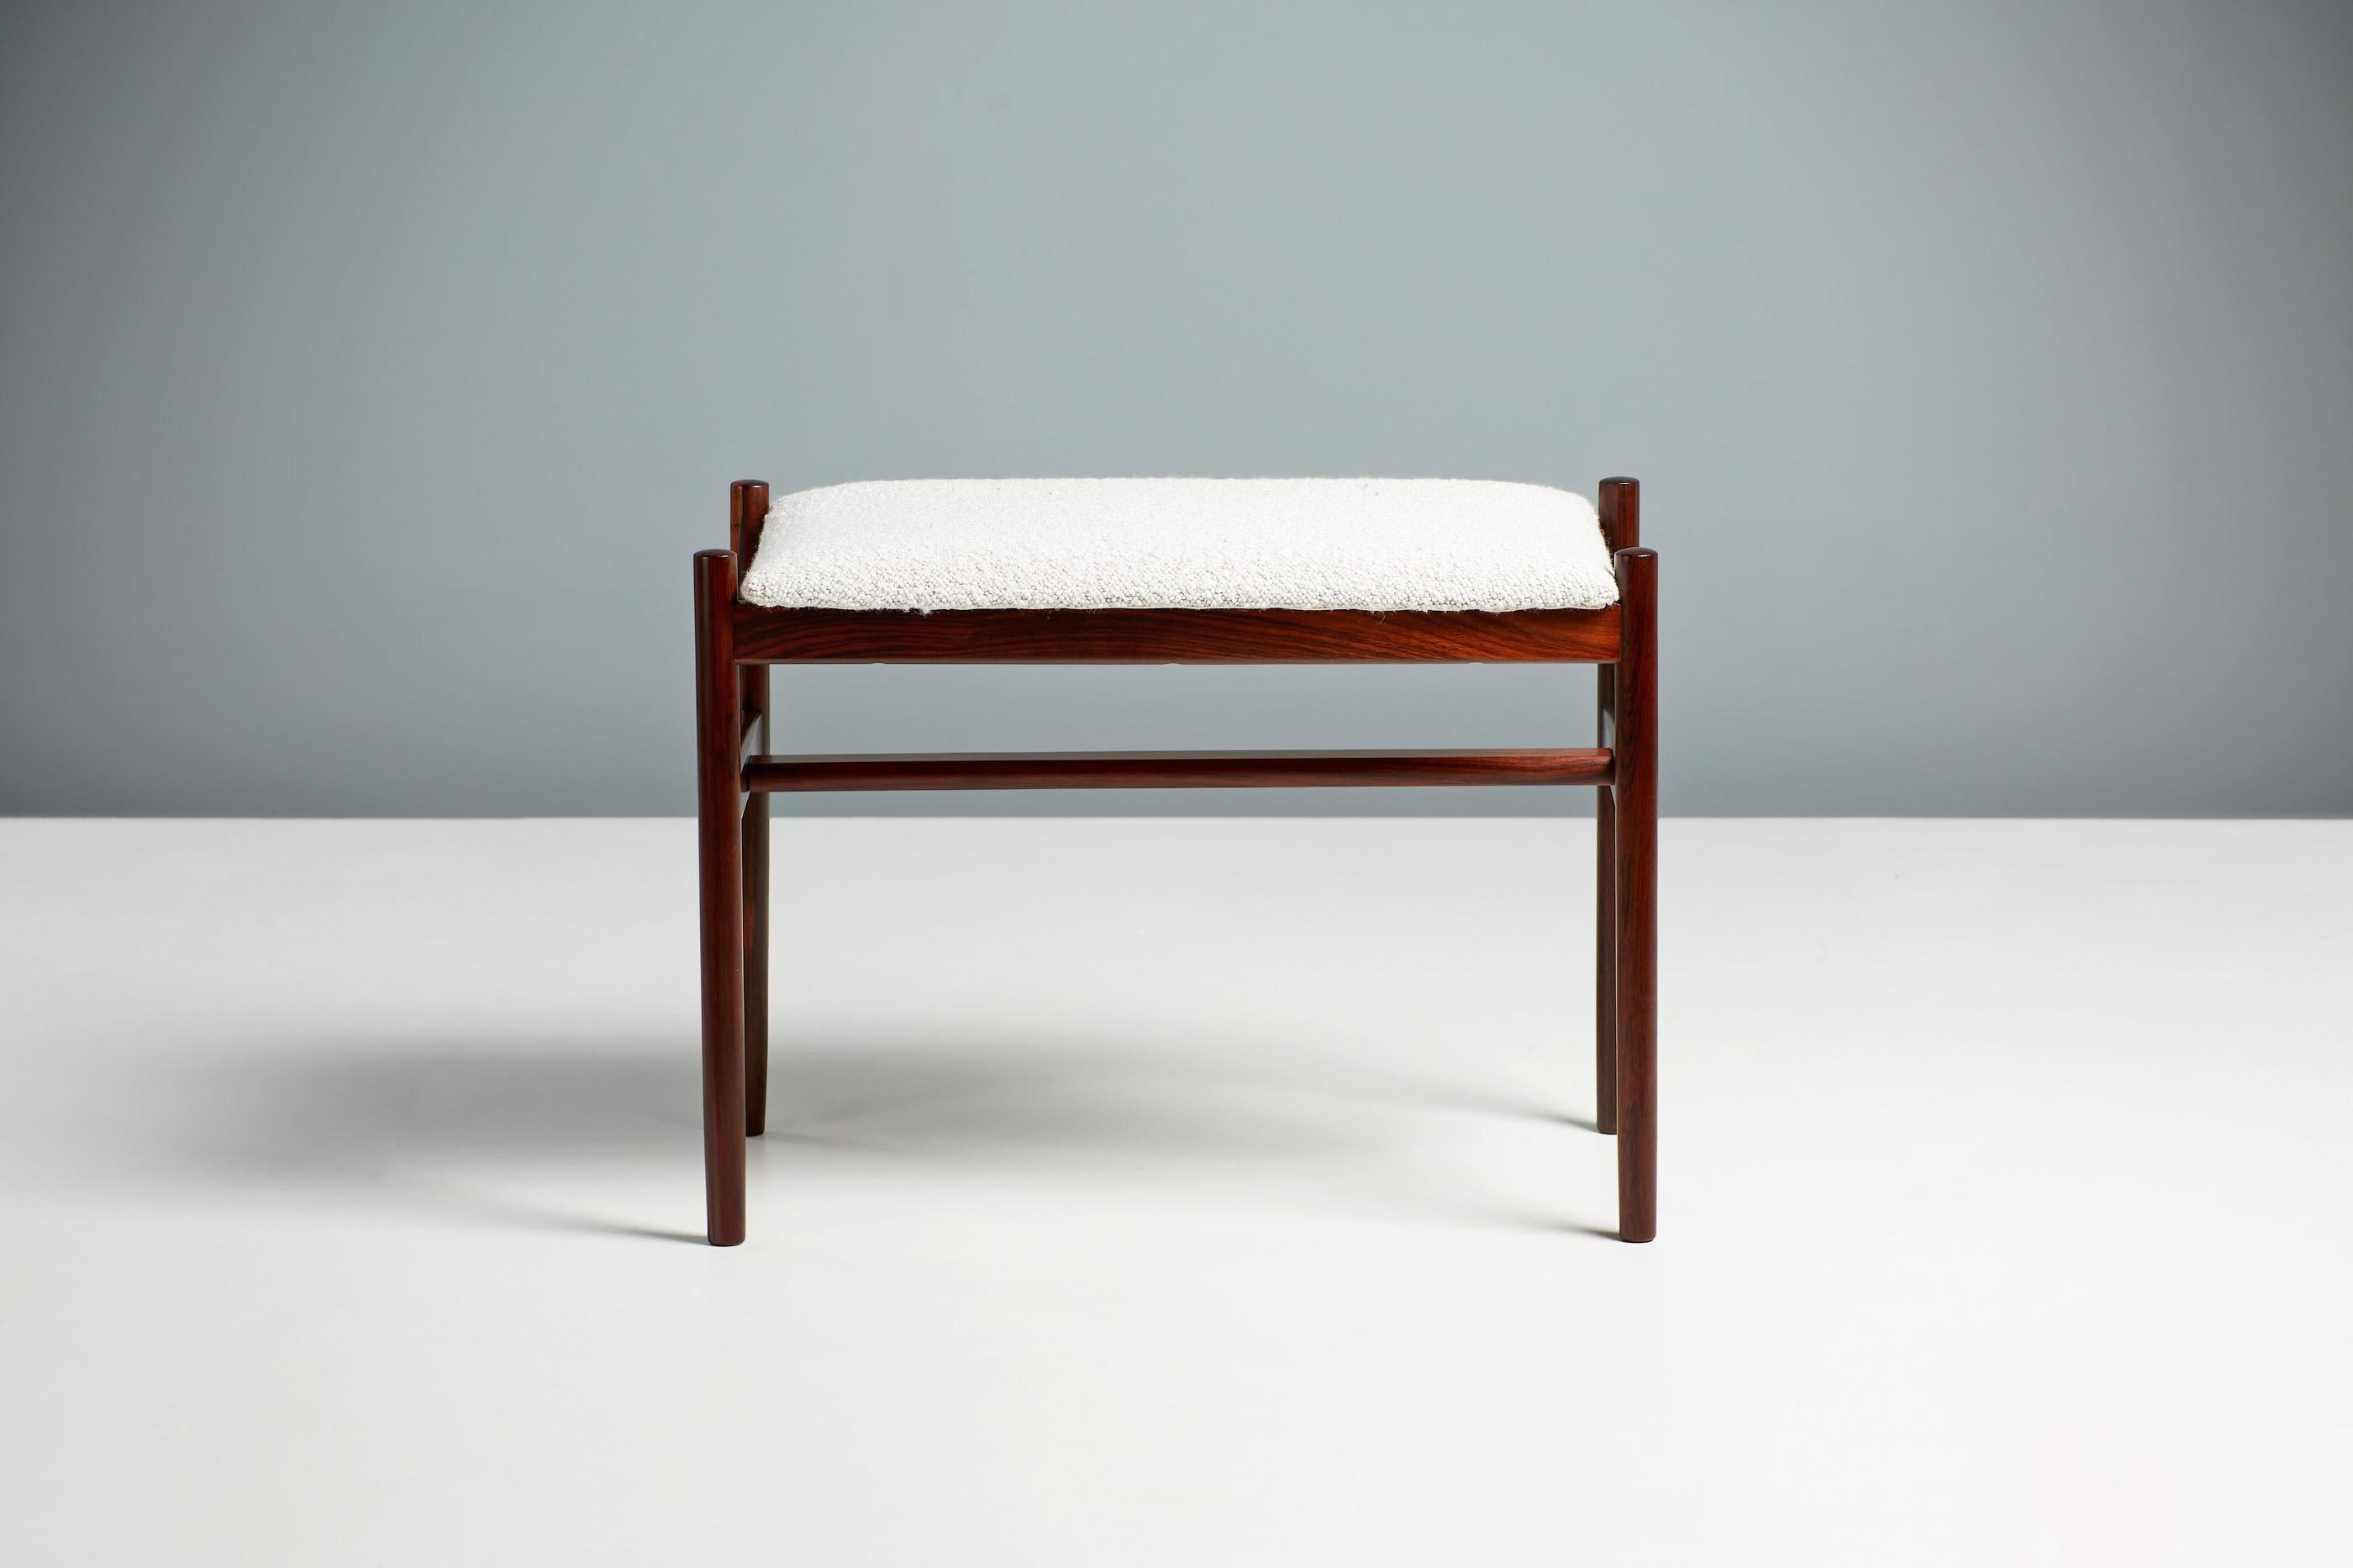 Spottrup Møbler, Rosewood Bench, circa 1960.

A tall rosewood bench with seat, designed by Spottrup Møblers in Denmark, circa 1960s. Reupholstered in cotton boucle fabric from Dedar Milano. Produced in Denmark - masterfully restored in our London